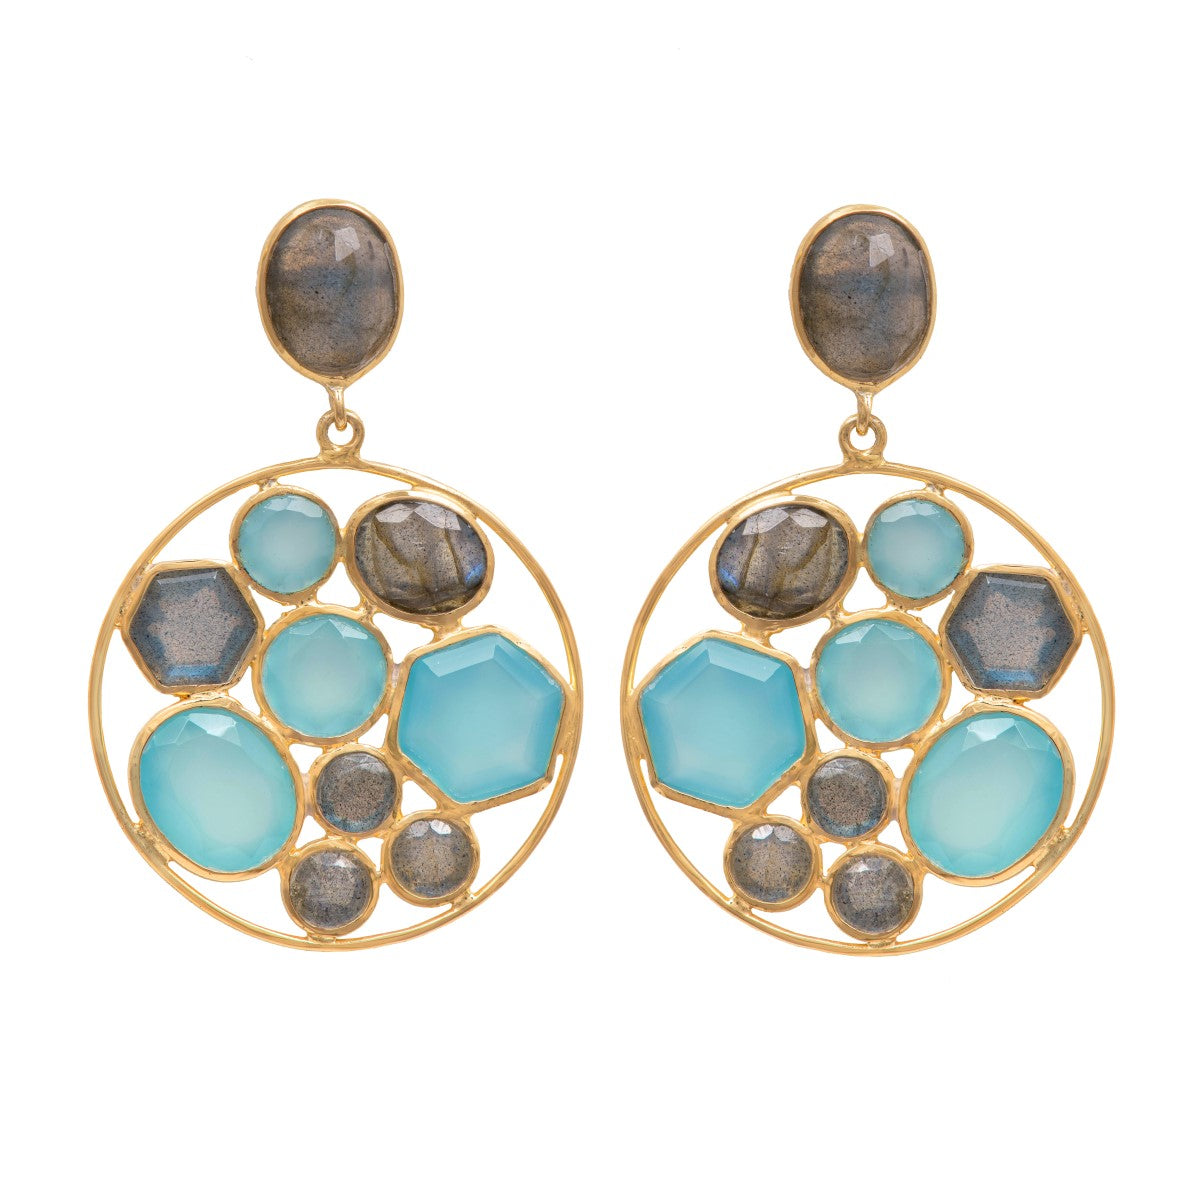 Long Gemstone Earrings with a Round Disc Drop with Stones in Gold Plated Sterling Silver - Aqua Chalcedony and Labradorite